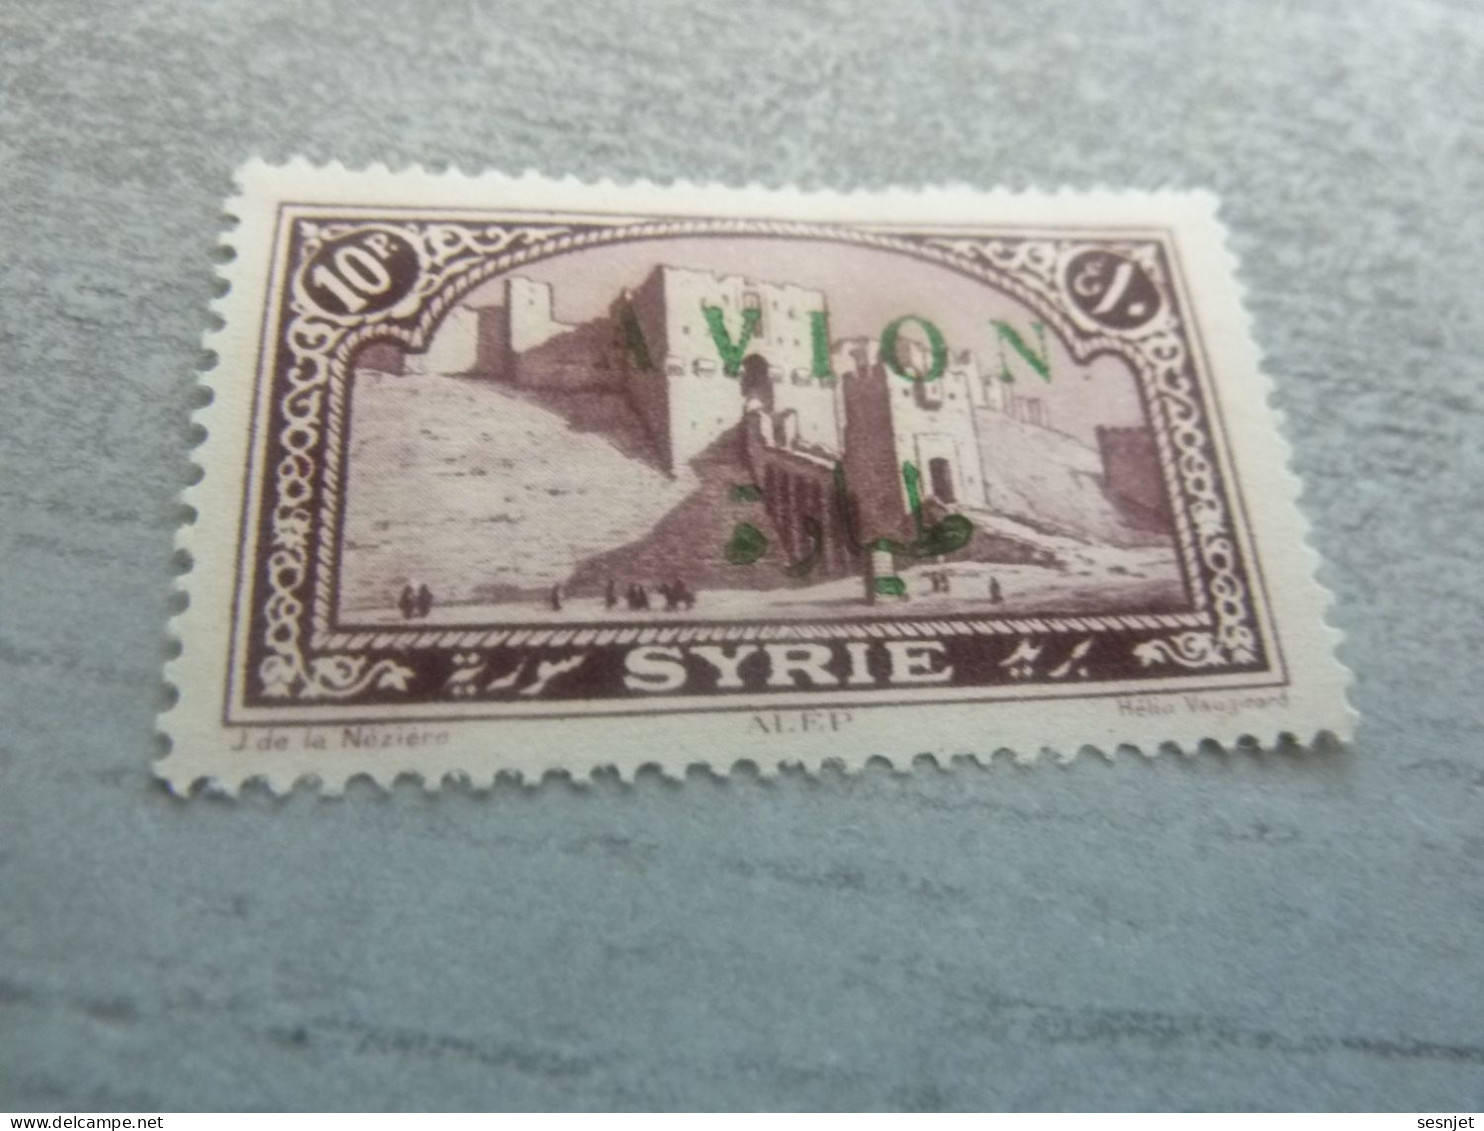 Syrie - Alep - Surcharge Avion - 10pi - Yt 29 (165) - Brun-lilas - Neuf - Année 1925 - - Airmail